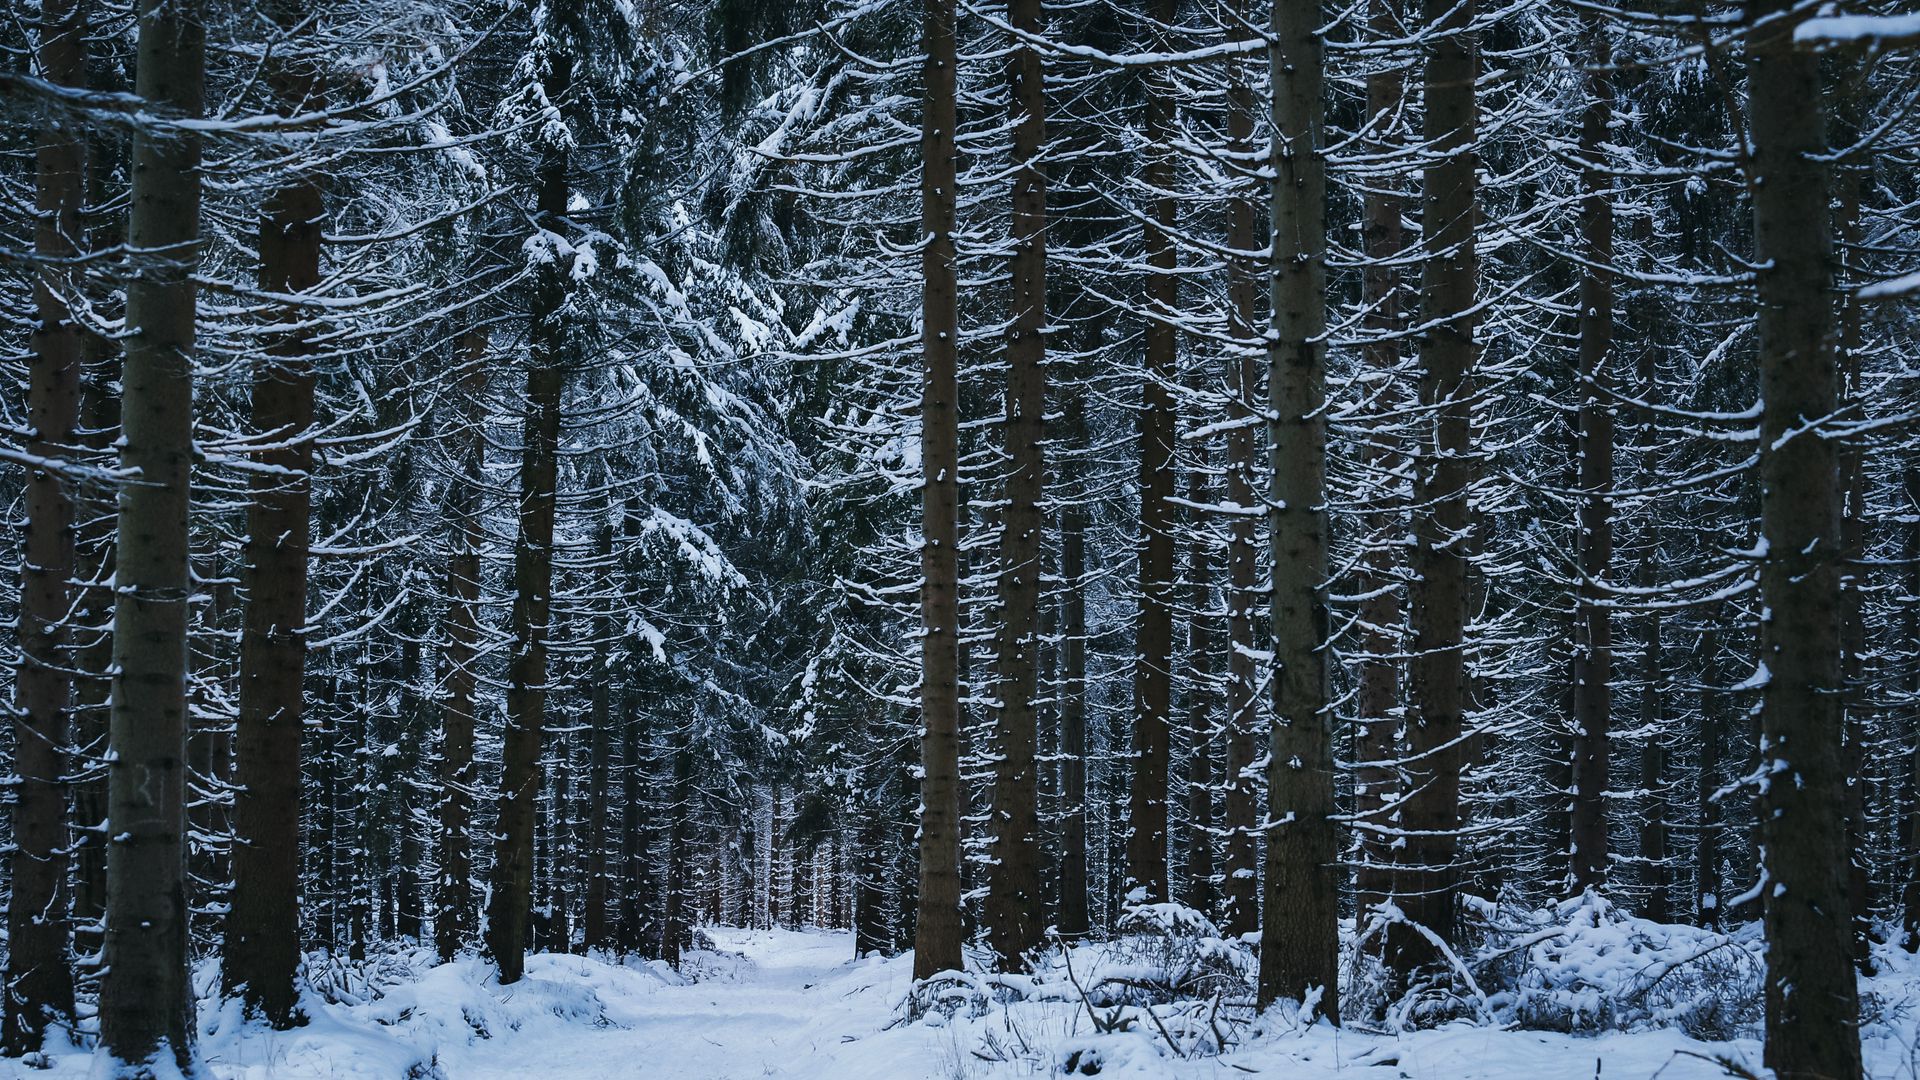 Download wallpaper 1920x1080 forest, winter, trees, snow full hd, hdtv ...